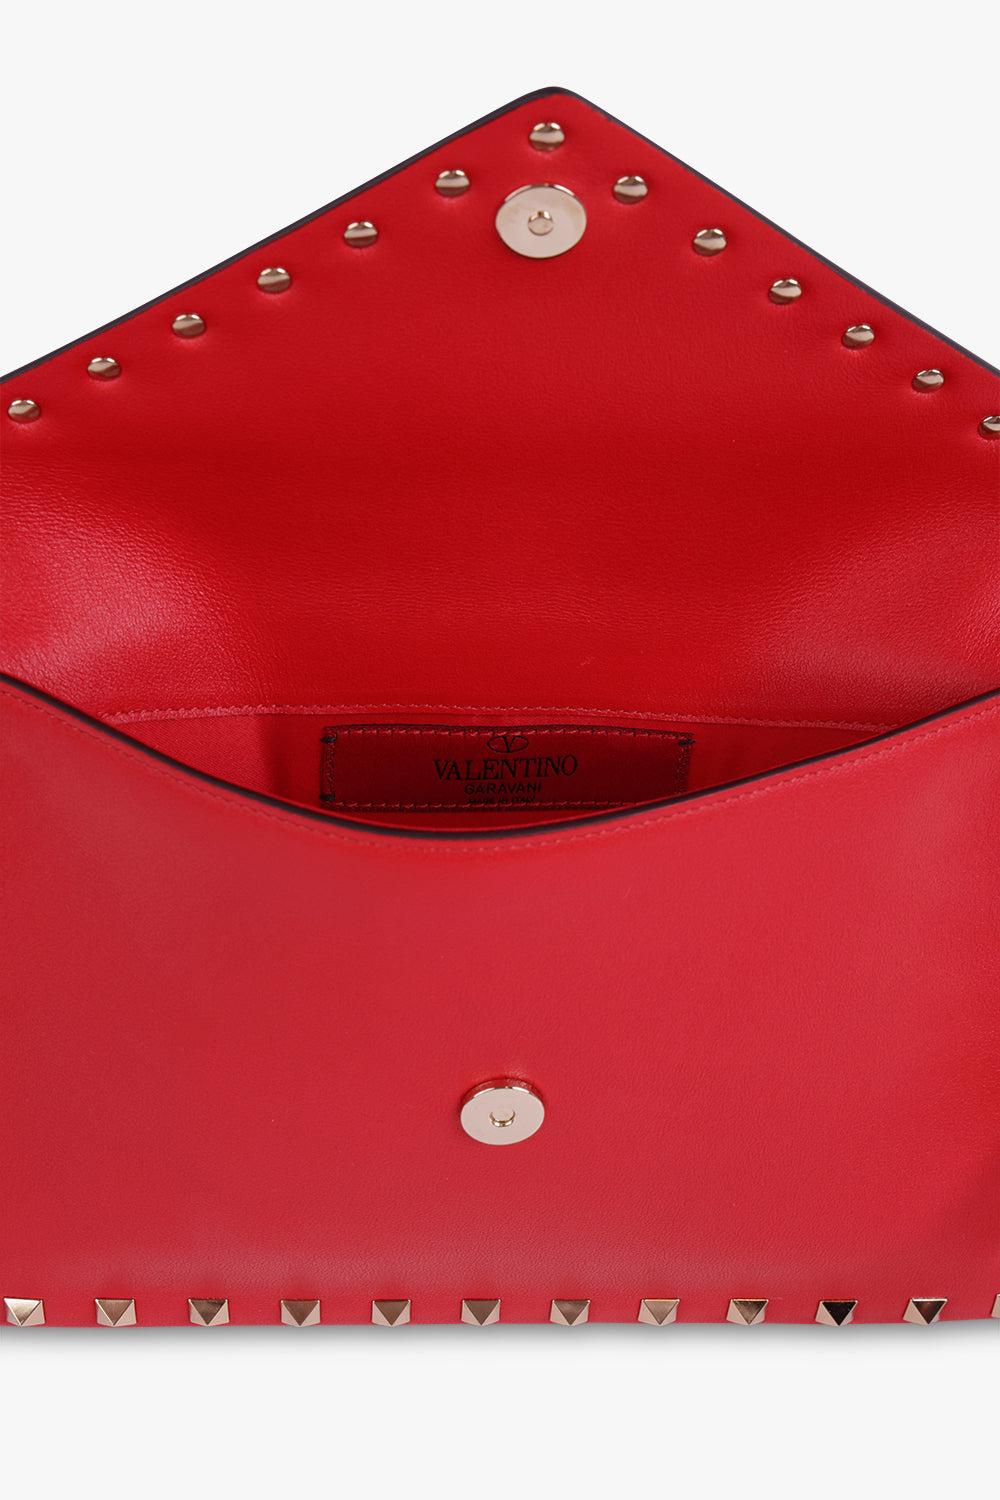 Leather handbag Valentino by mario valentino Red in Leather - 40723355